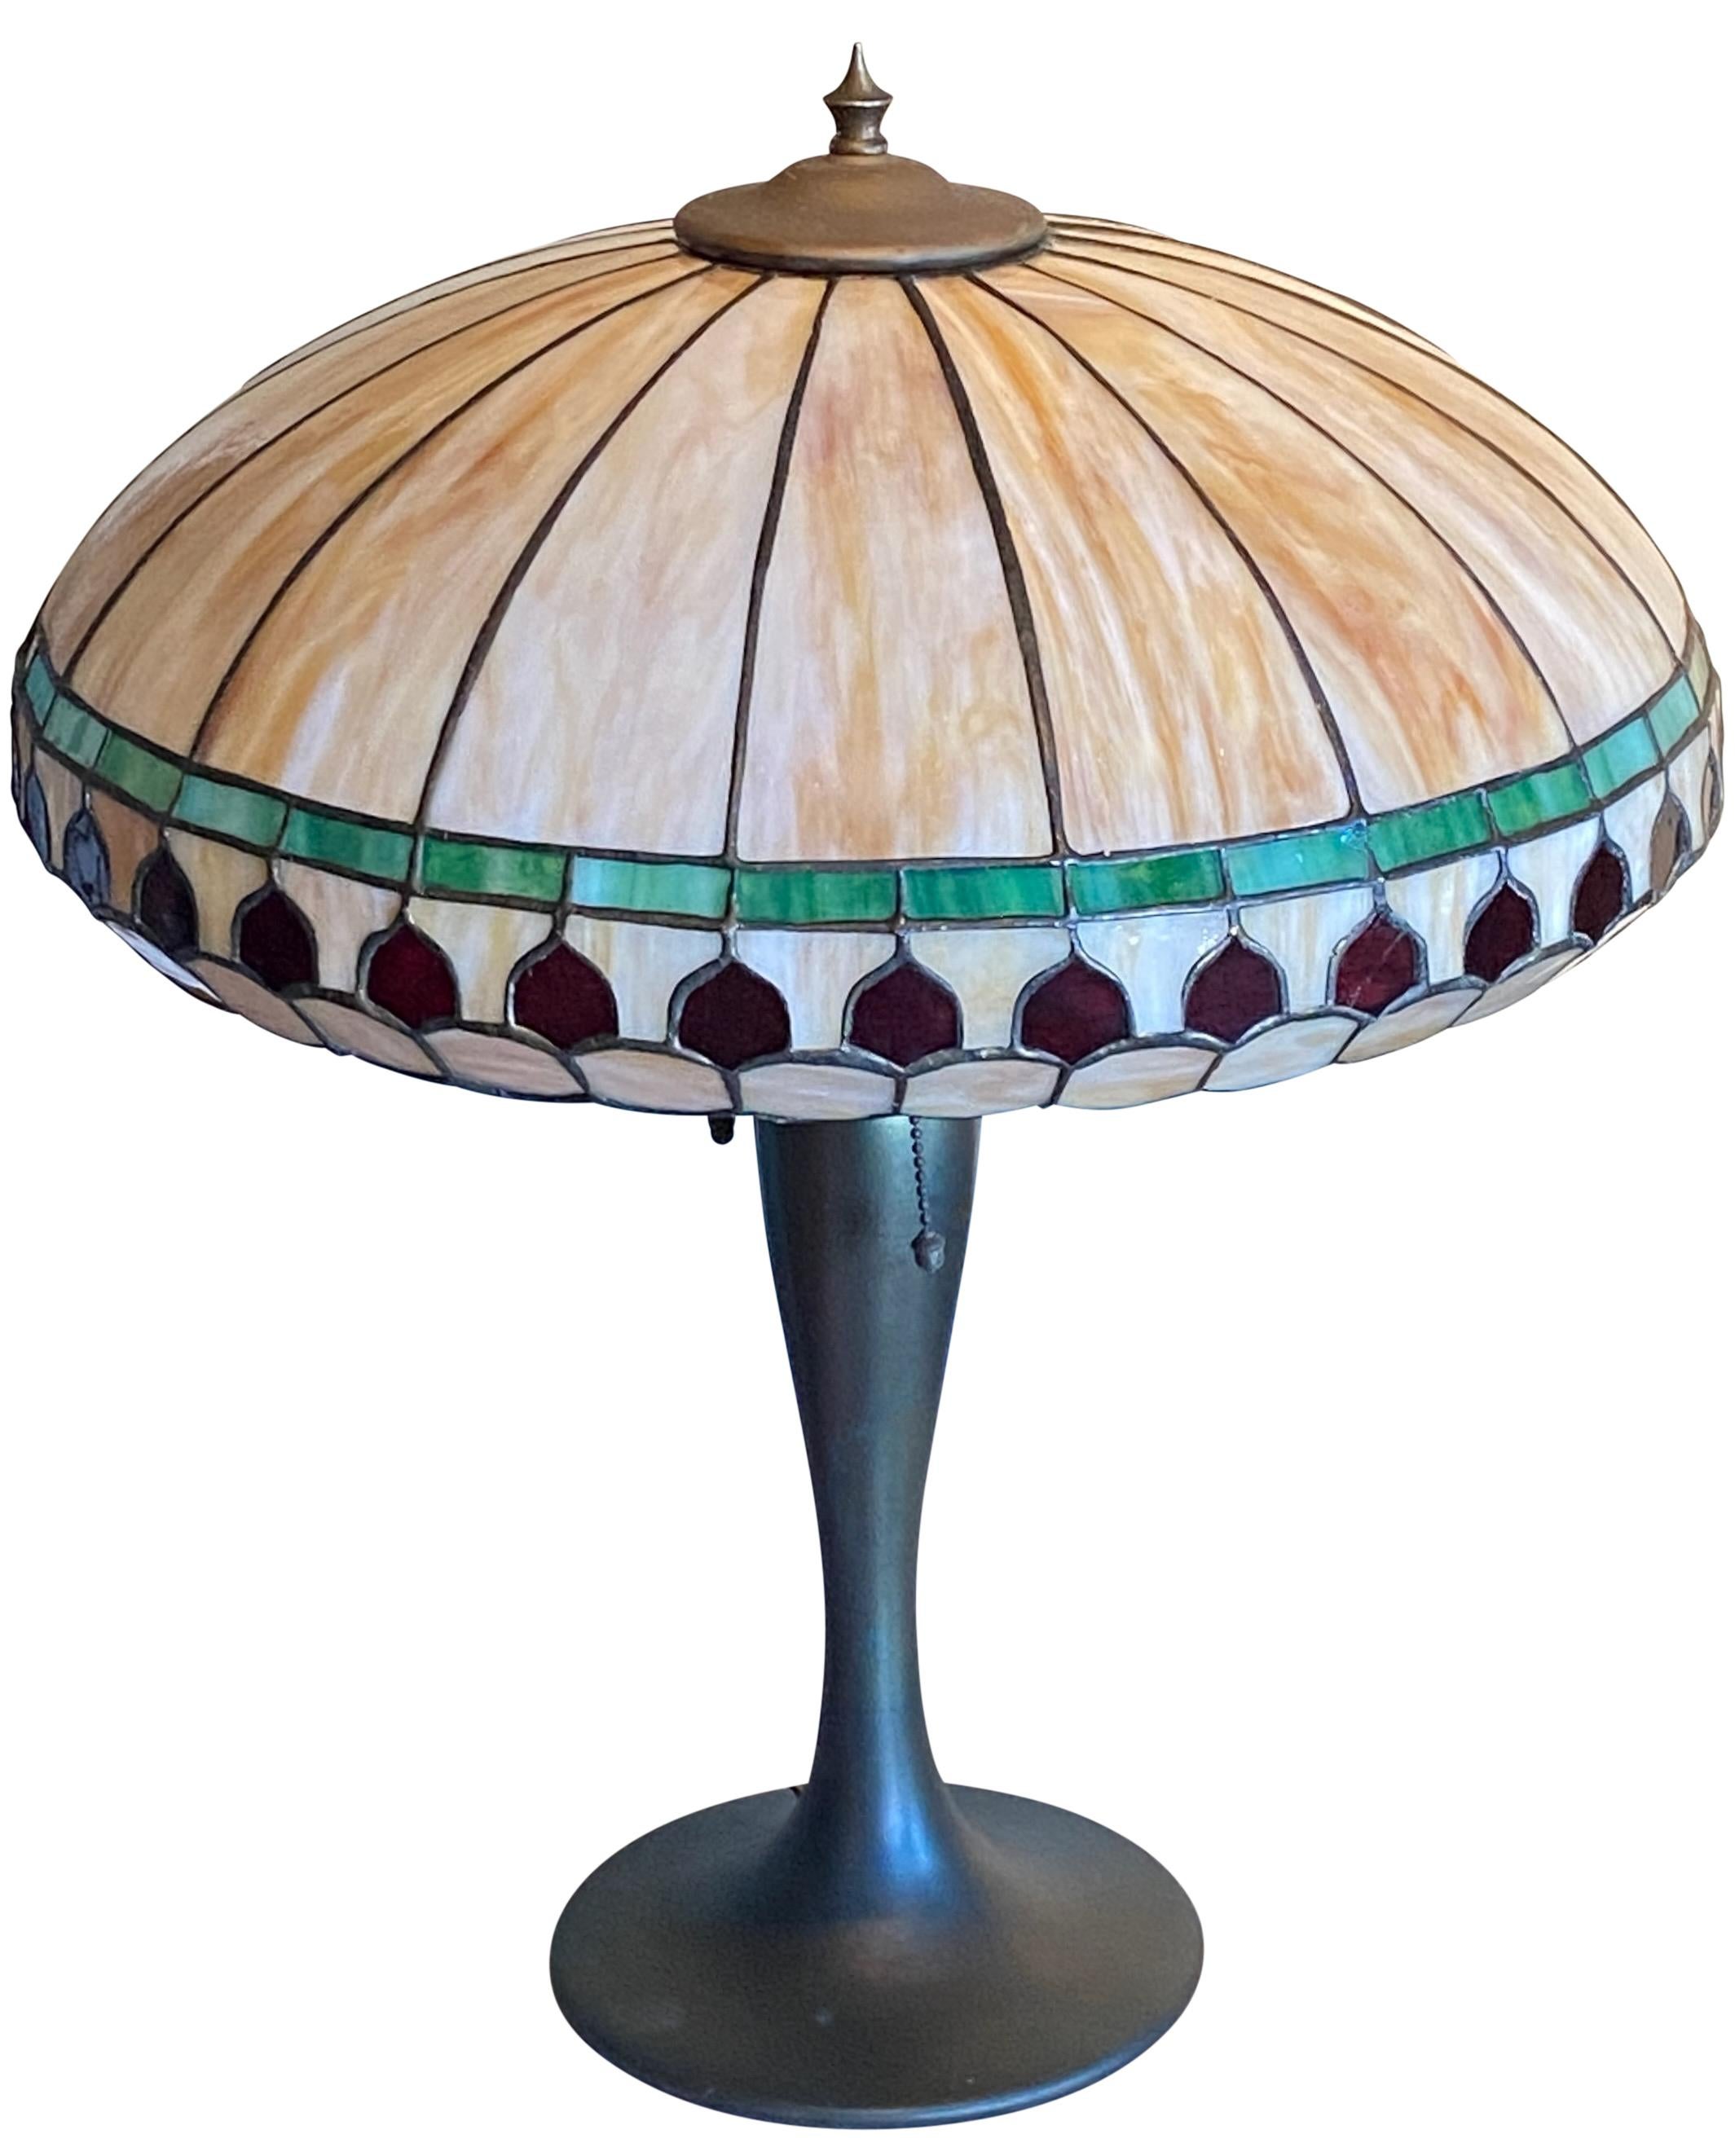 Early 20th Century American Arts and Crafts Era Leaded Table Lamp For Sale 2